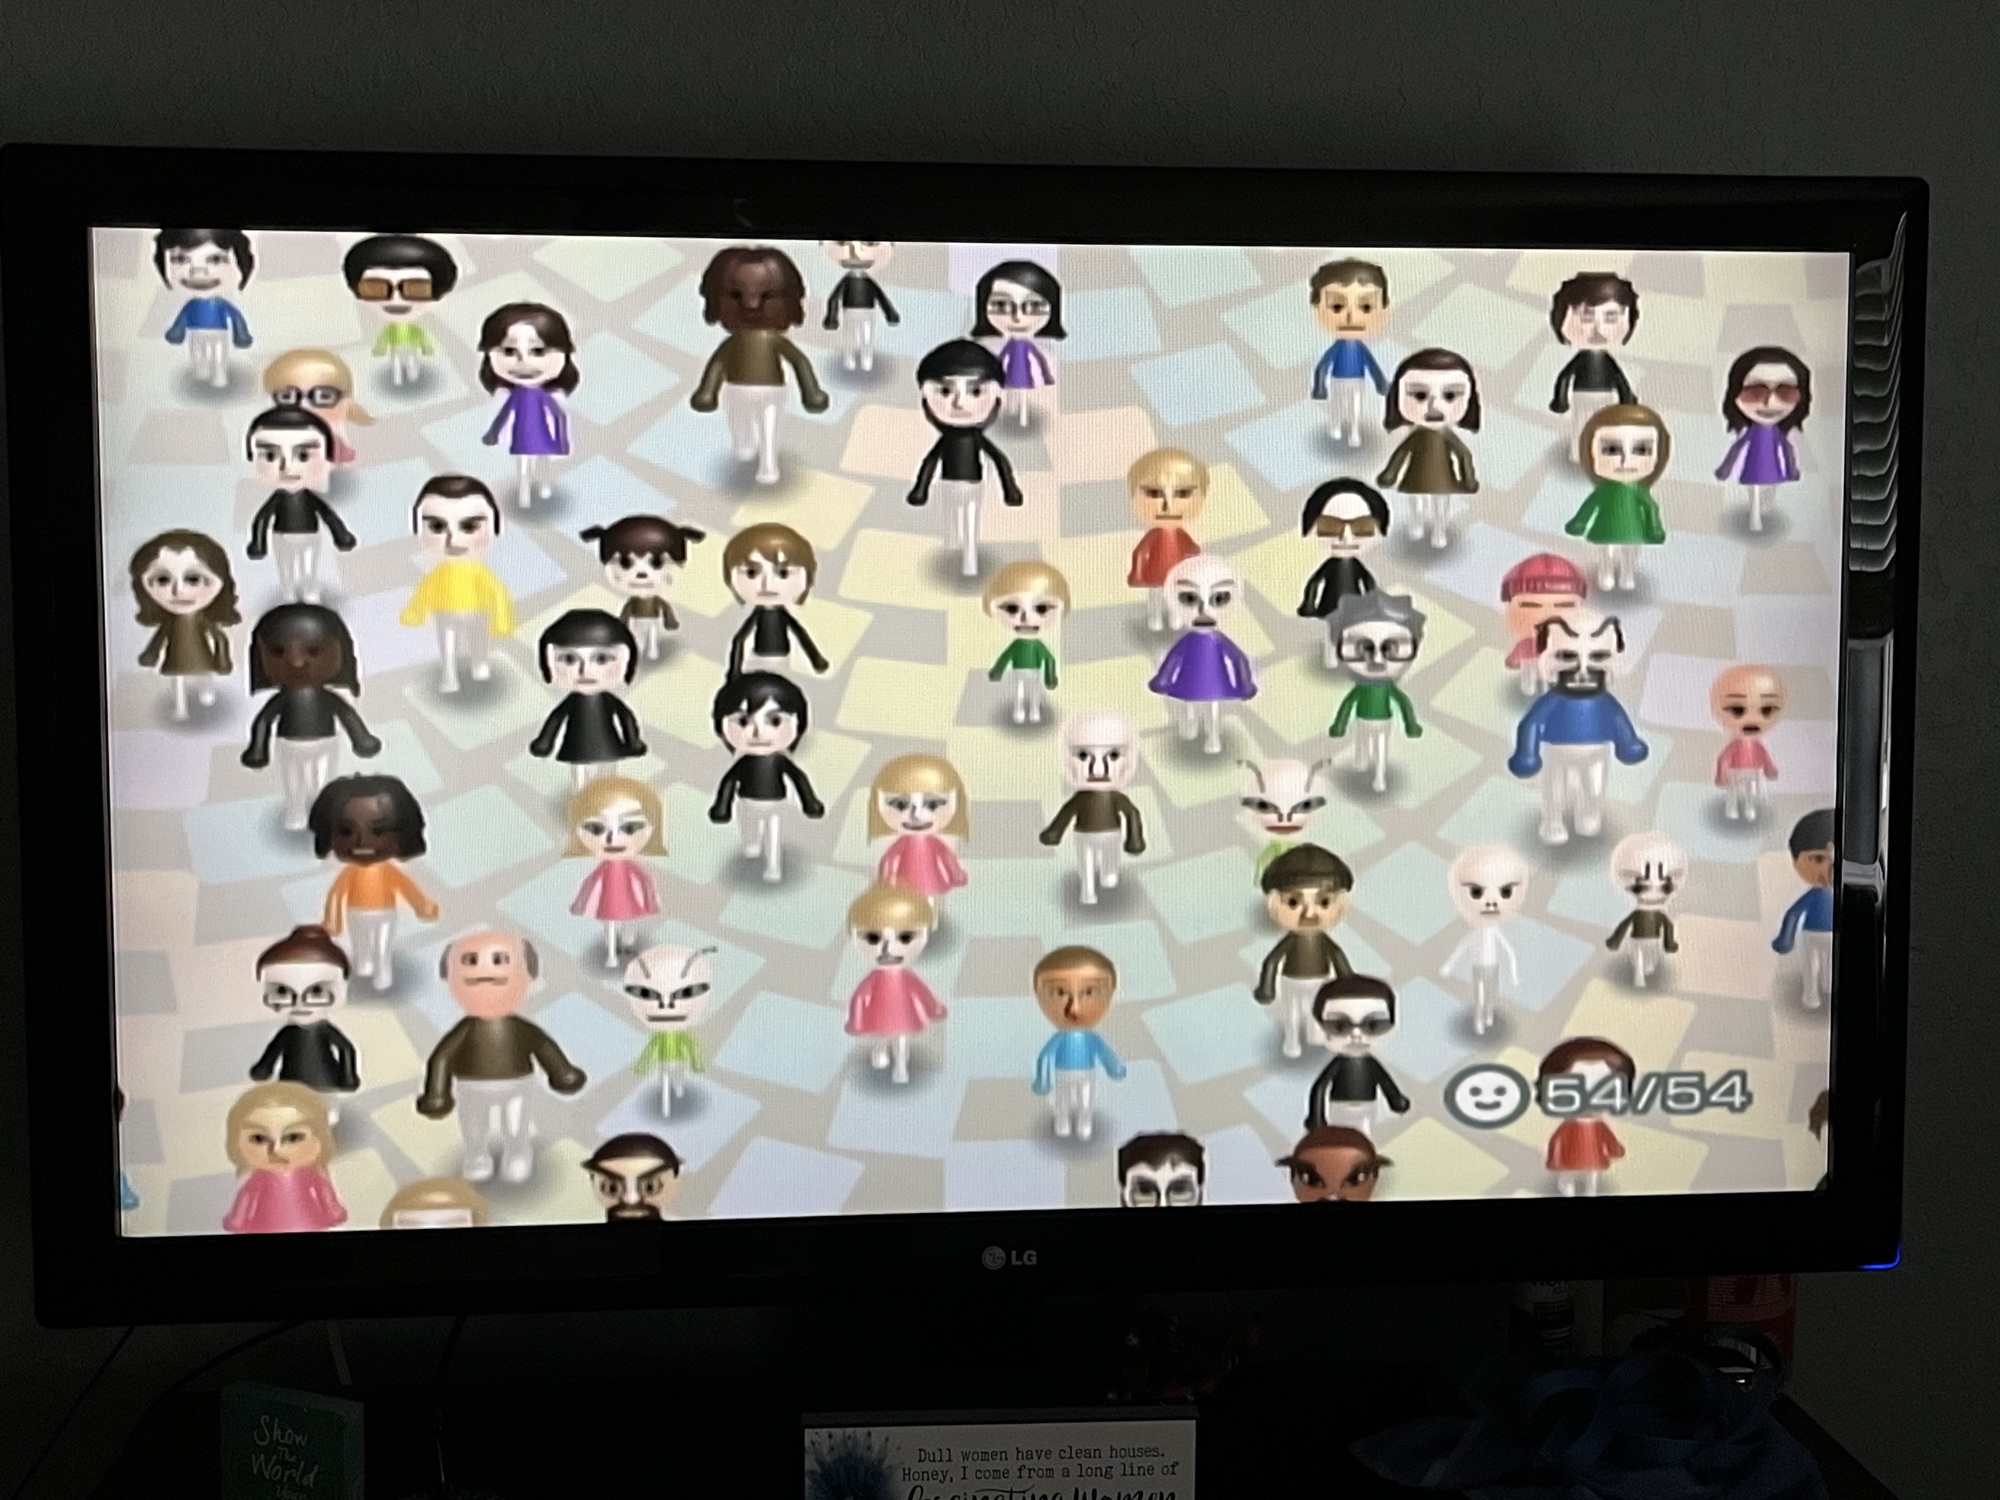 The march of the Miis.